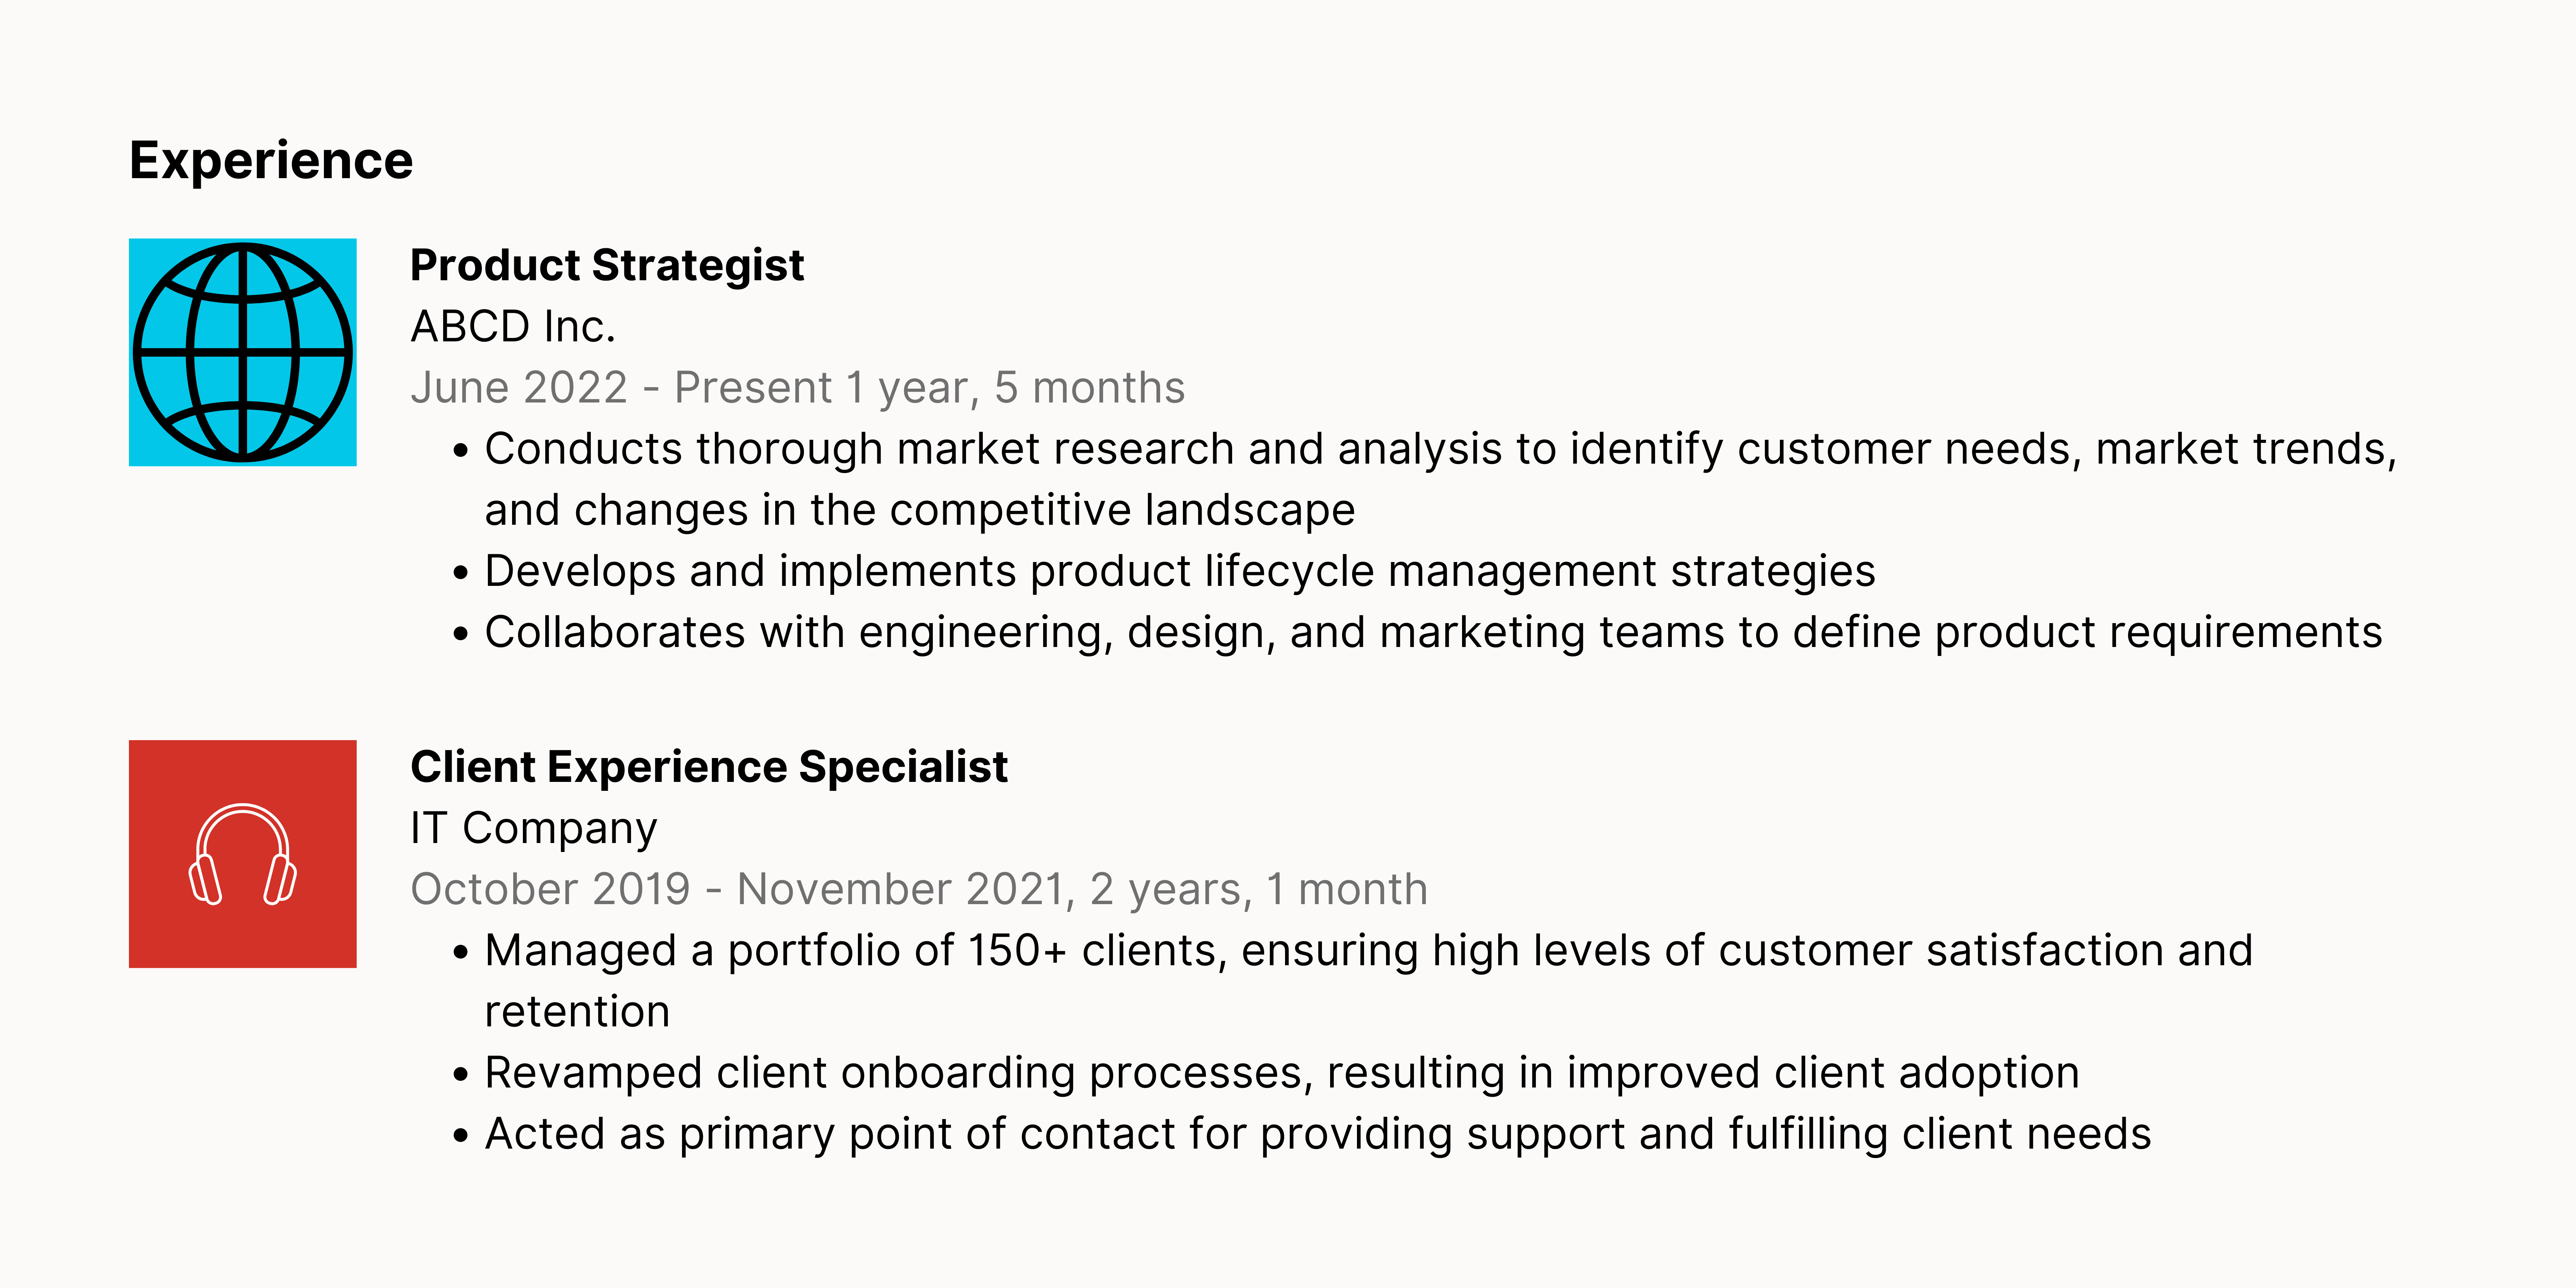 A screenshot shows an experience section with two previous jobs listed. Each position has several bullet points detailing the user's work.